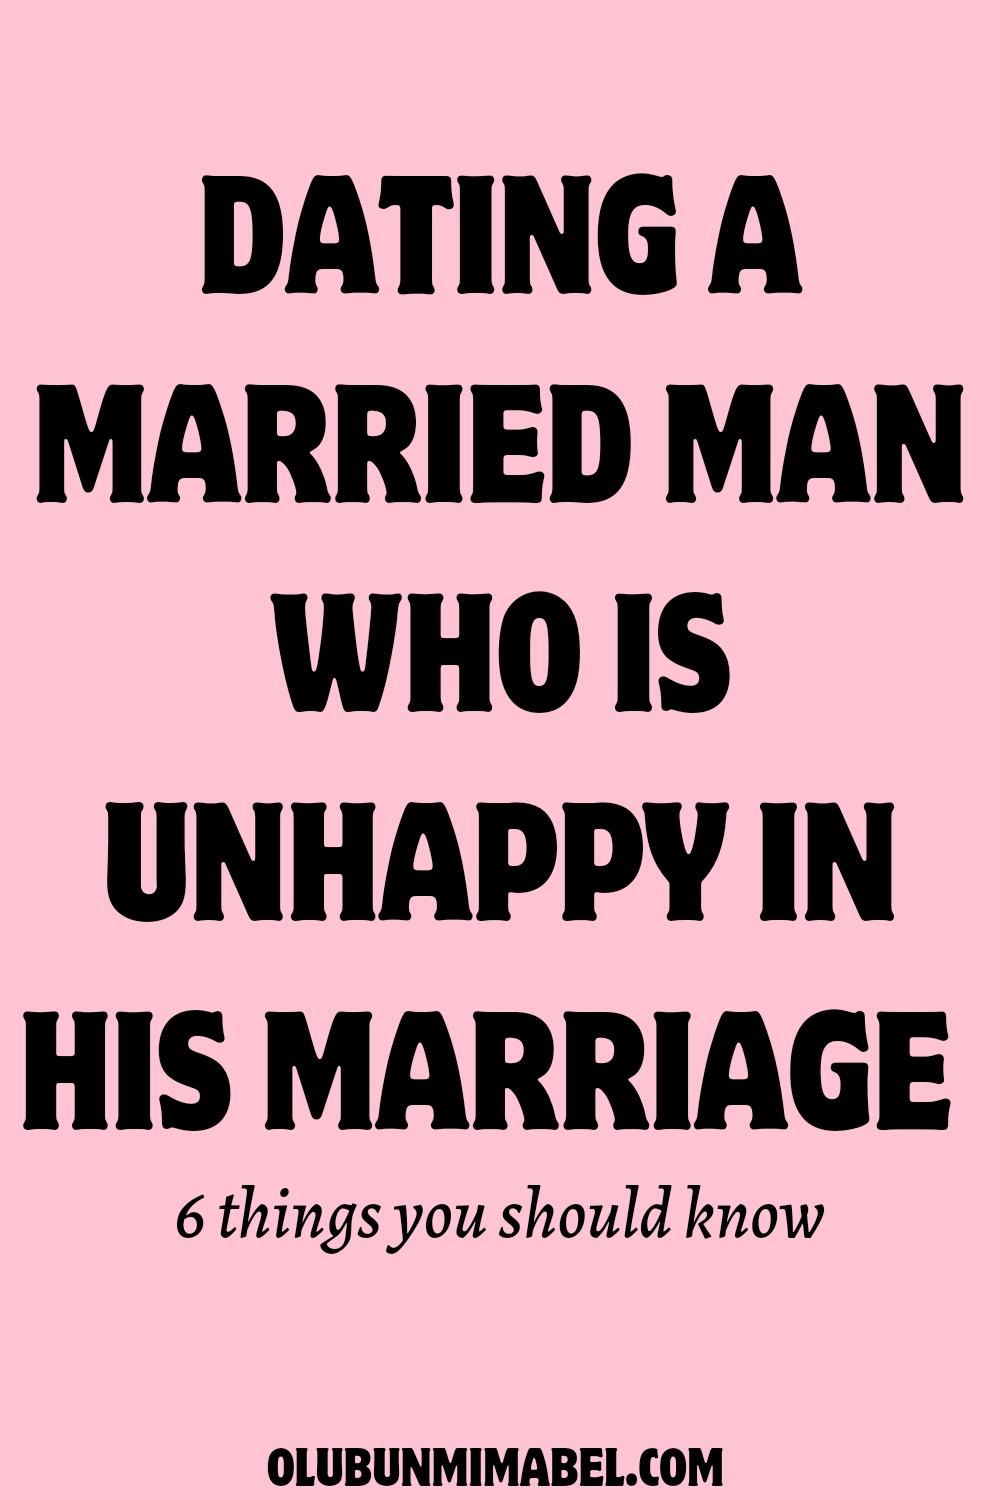 Dating a Married Man Who is Unhappy in His Marriage